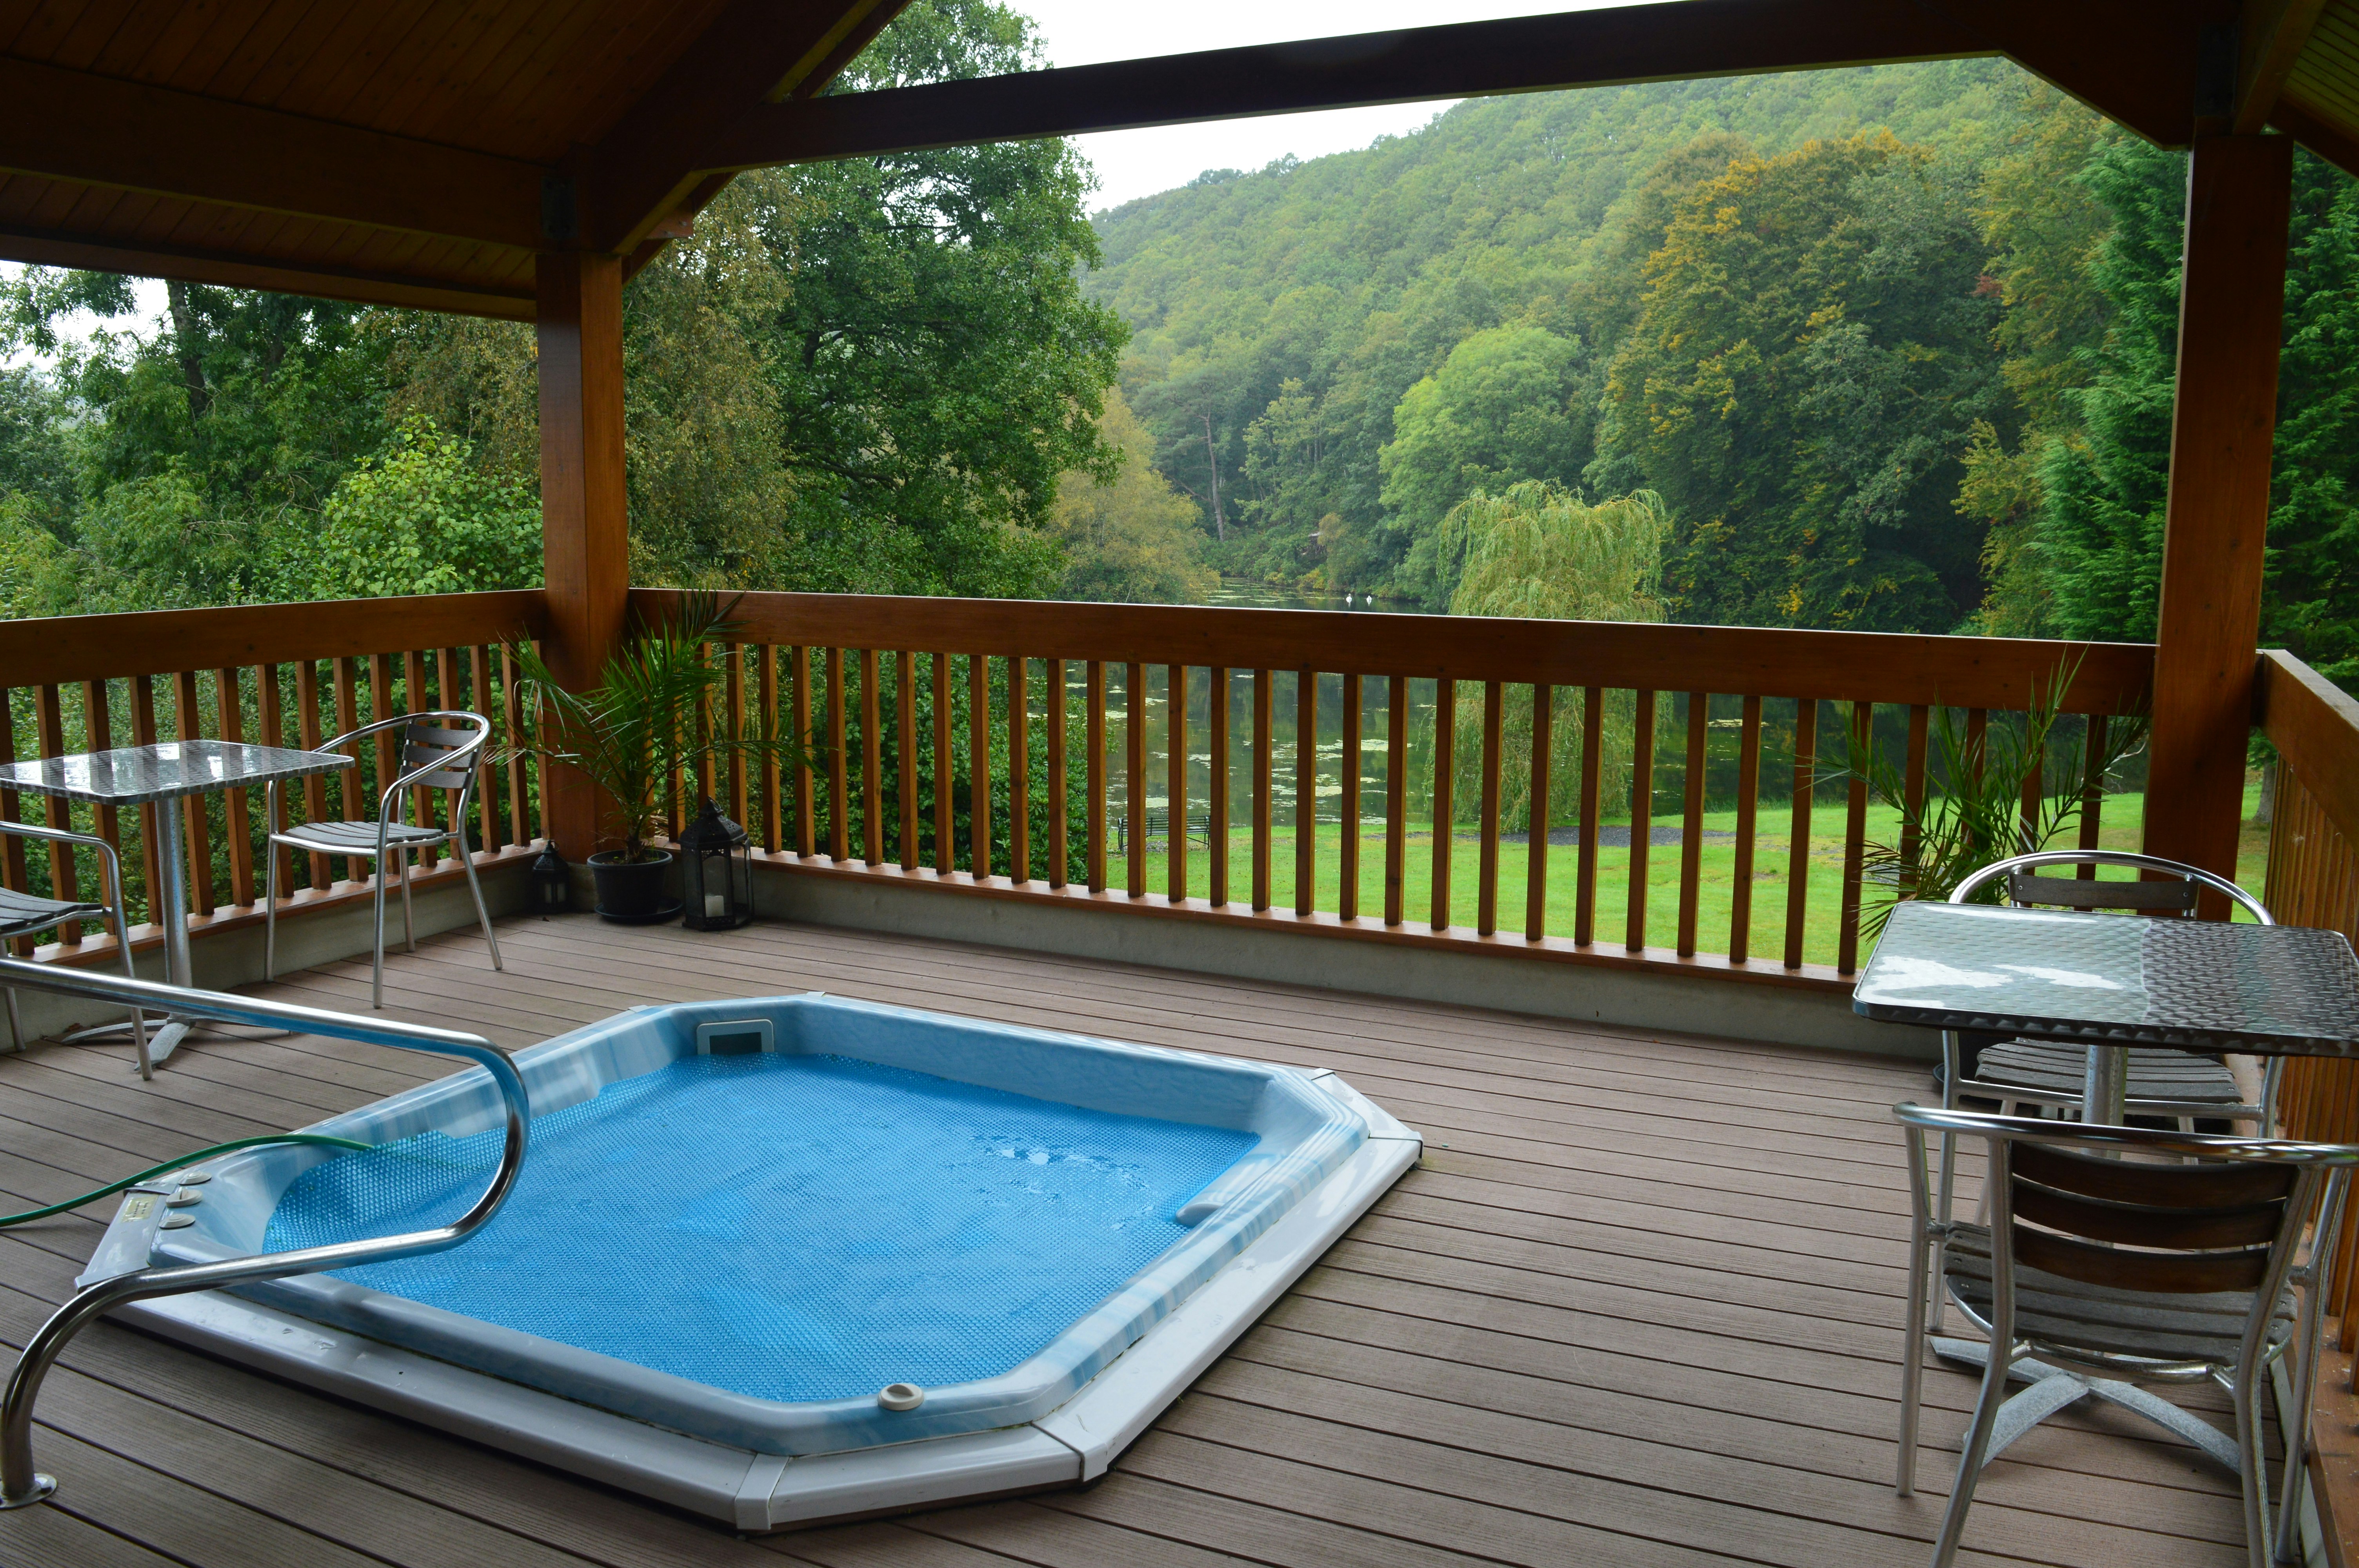 A hot tub surrounded by wooden decking and a roof with views of the countryside.